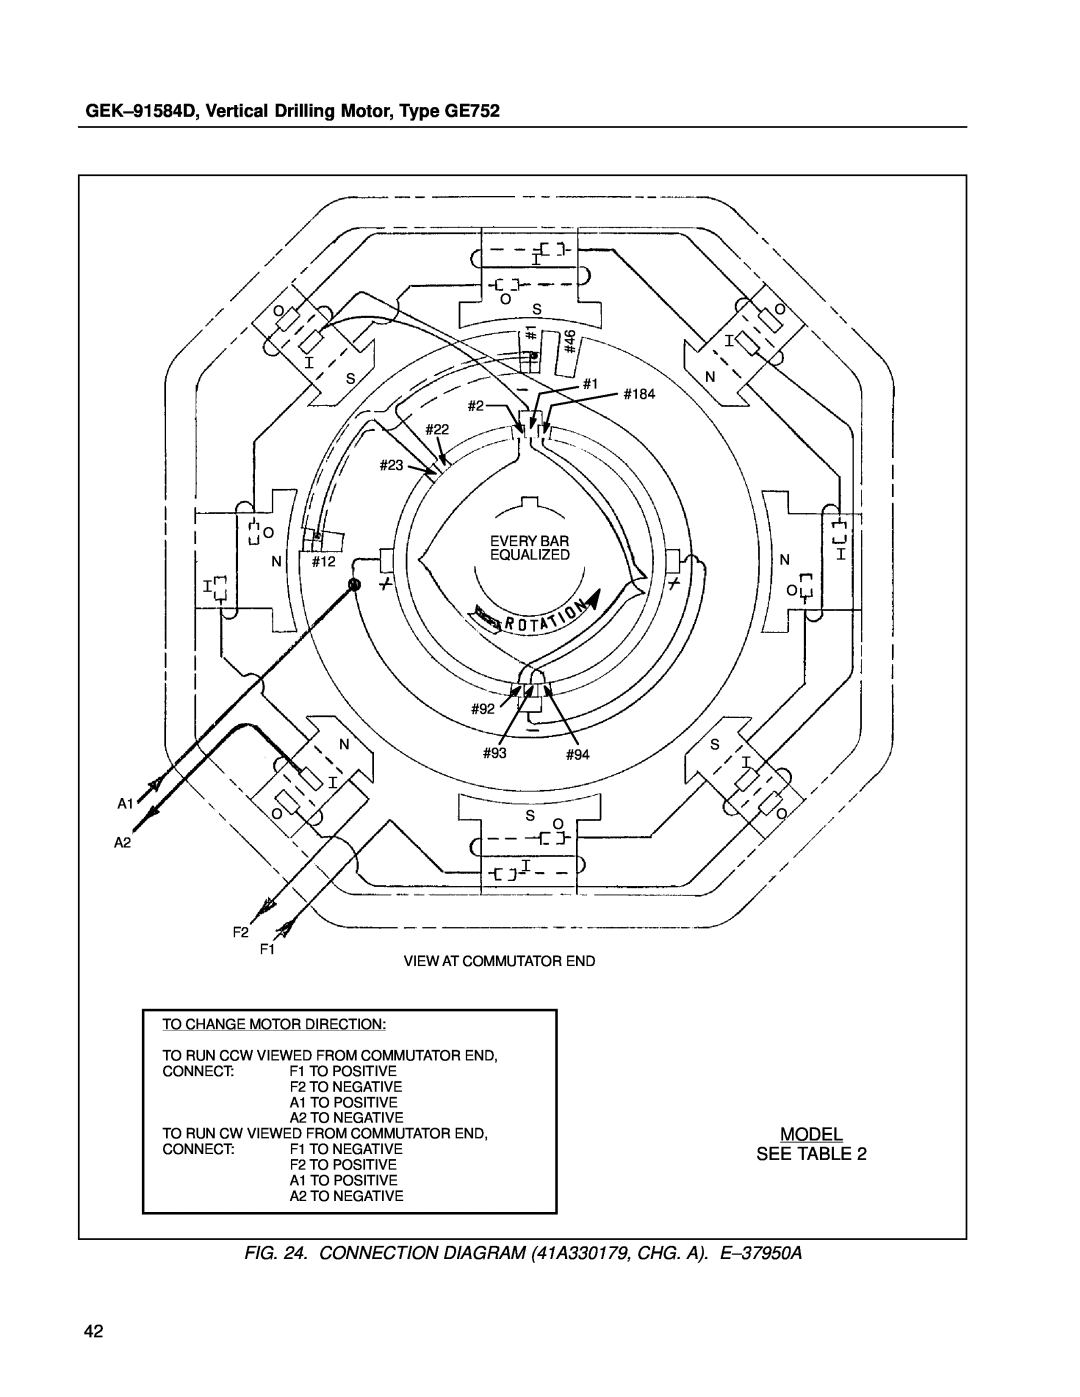 GE CONNECTION DIAGRAM 41A330179, CHG. A. E±37950A, GEK±91584D, Vertical Drilling Motor, Type GE752, Model See Table 